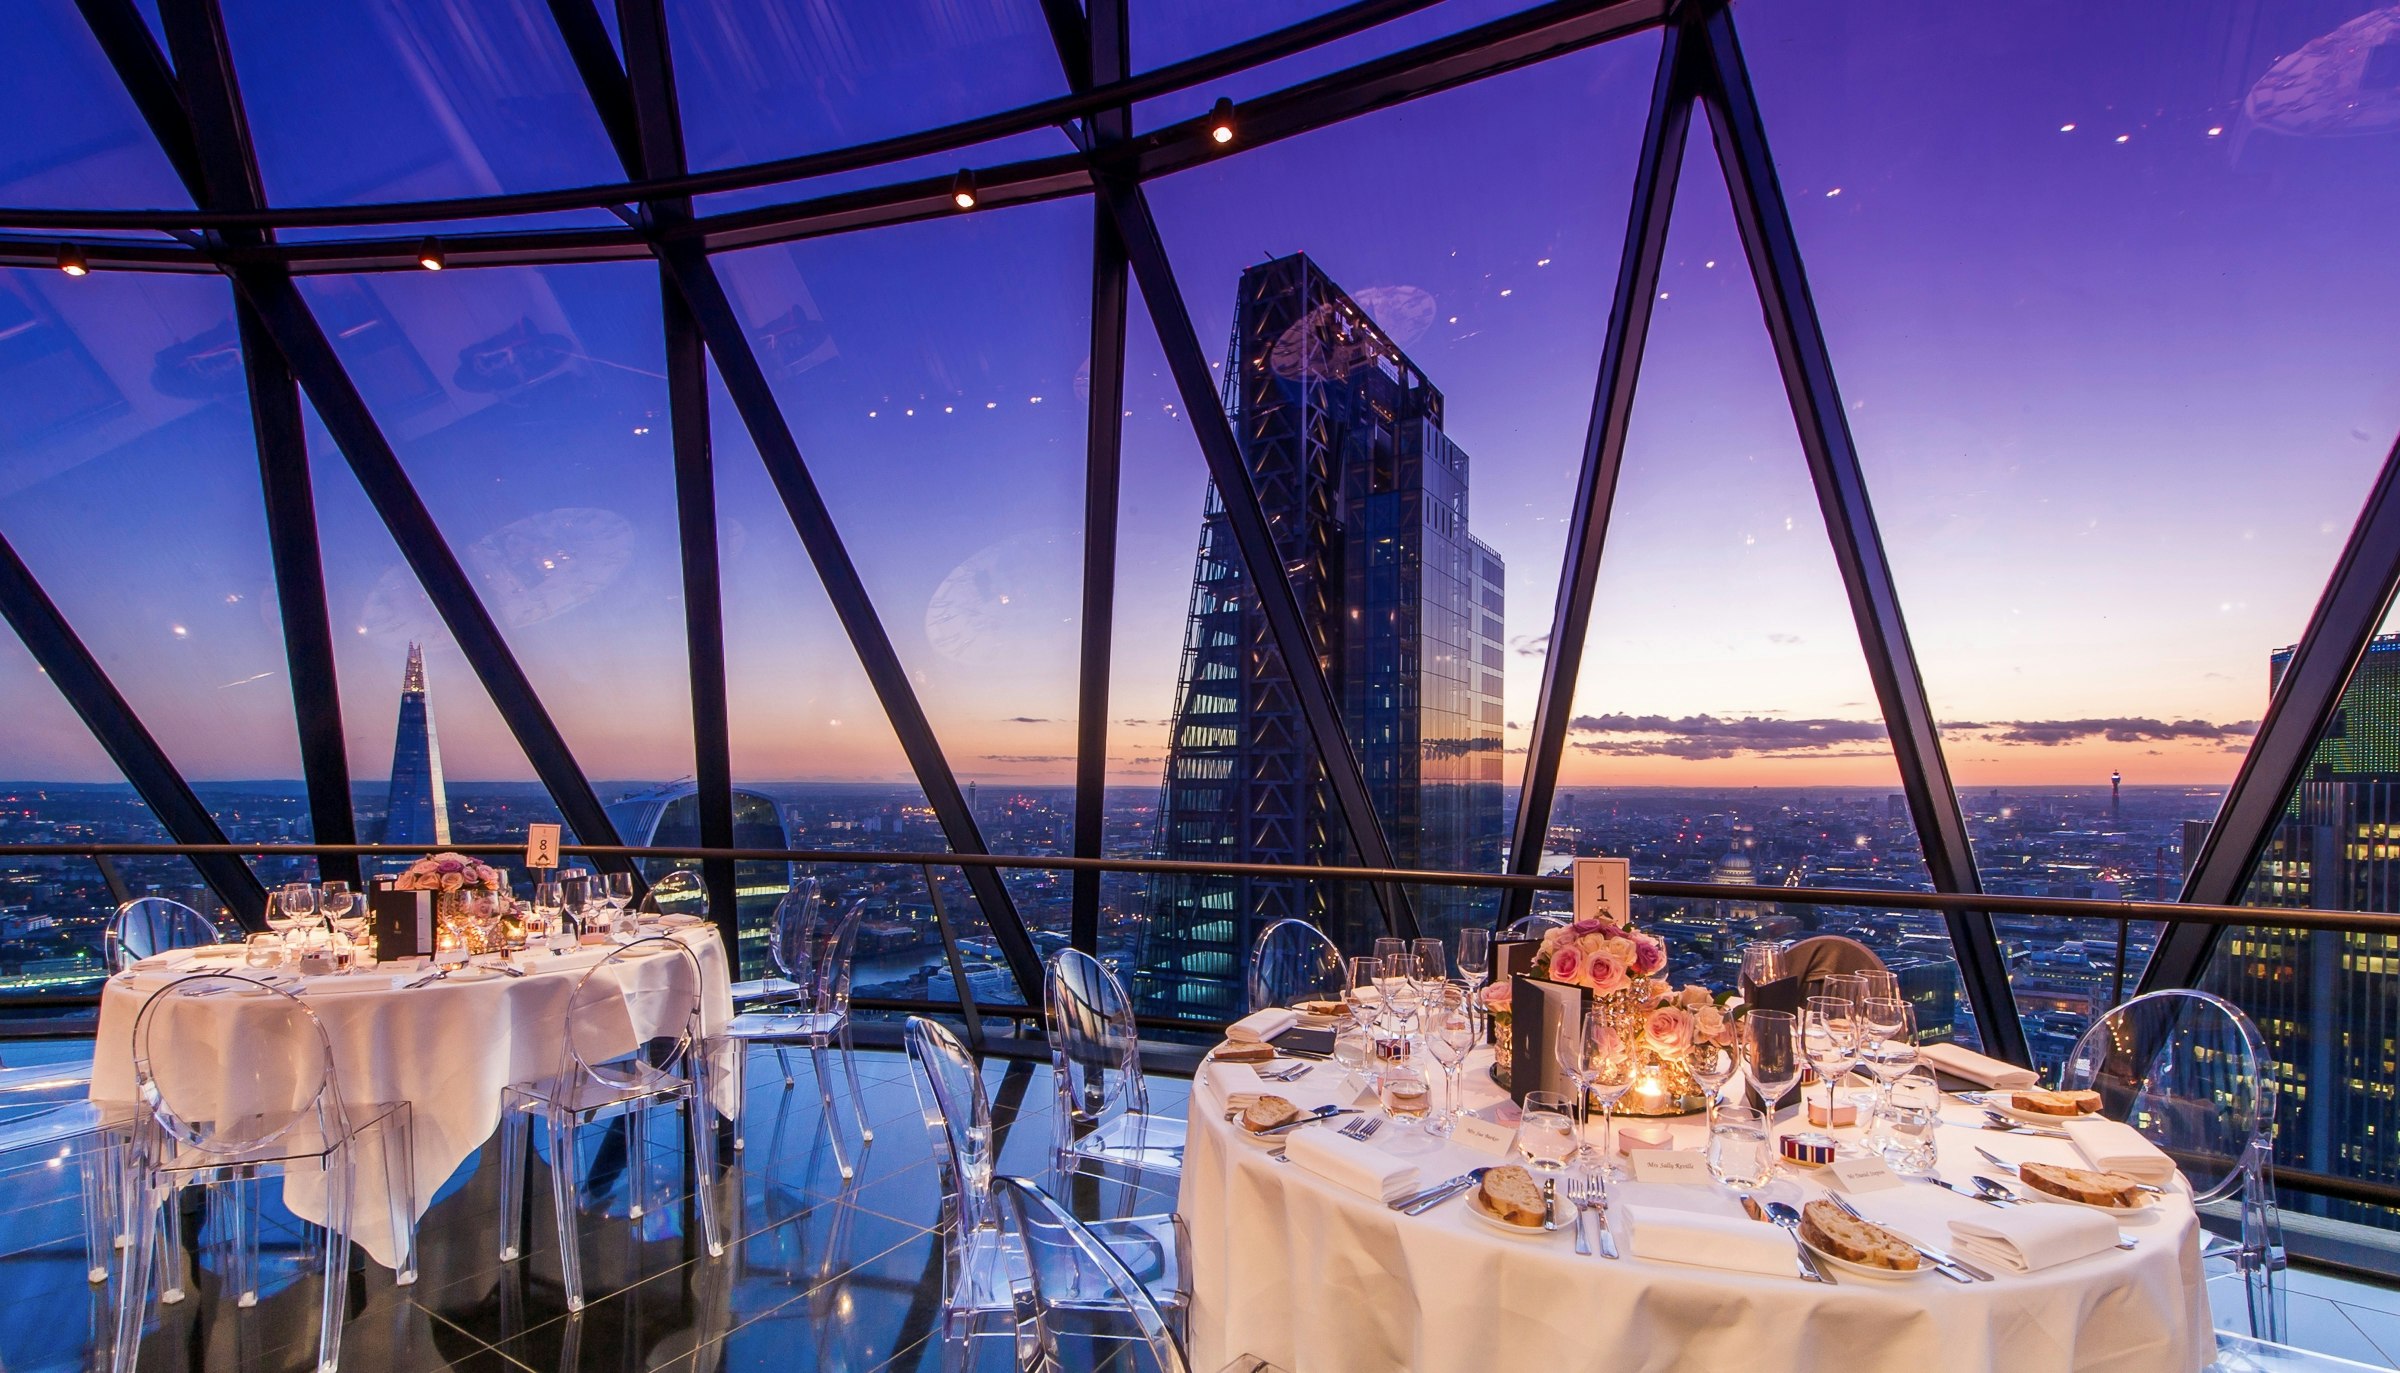 Searcys at the Gherkin - Exclusive hire of Helix and Iris image 5